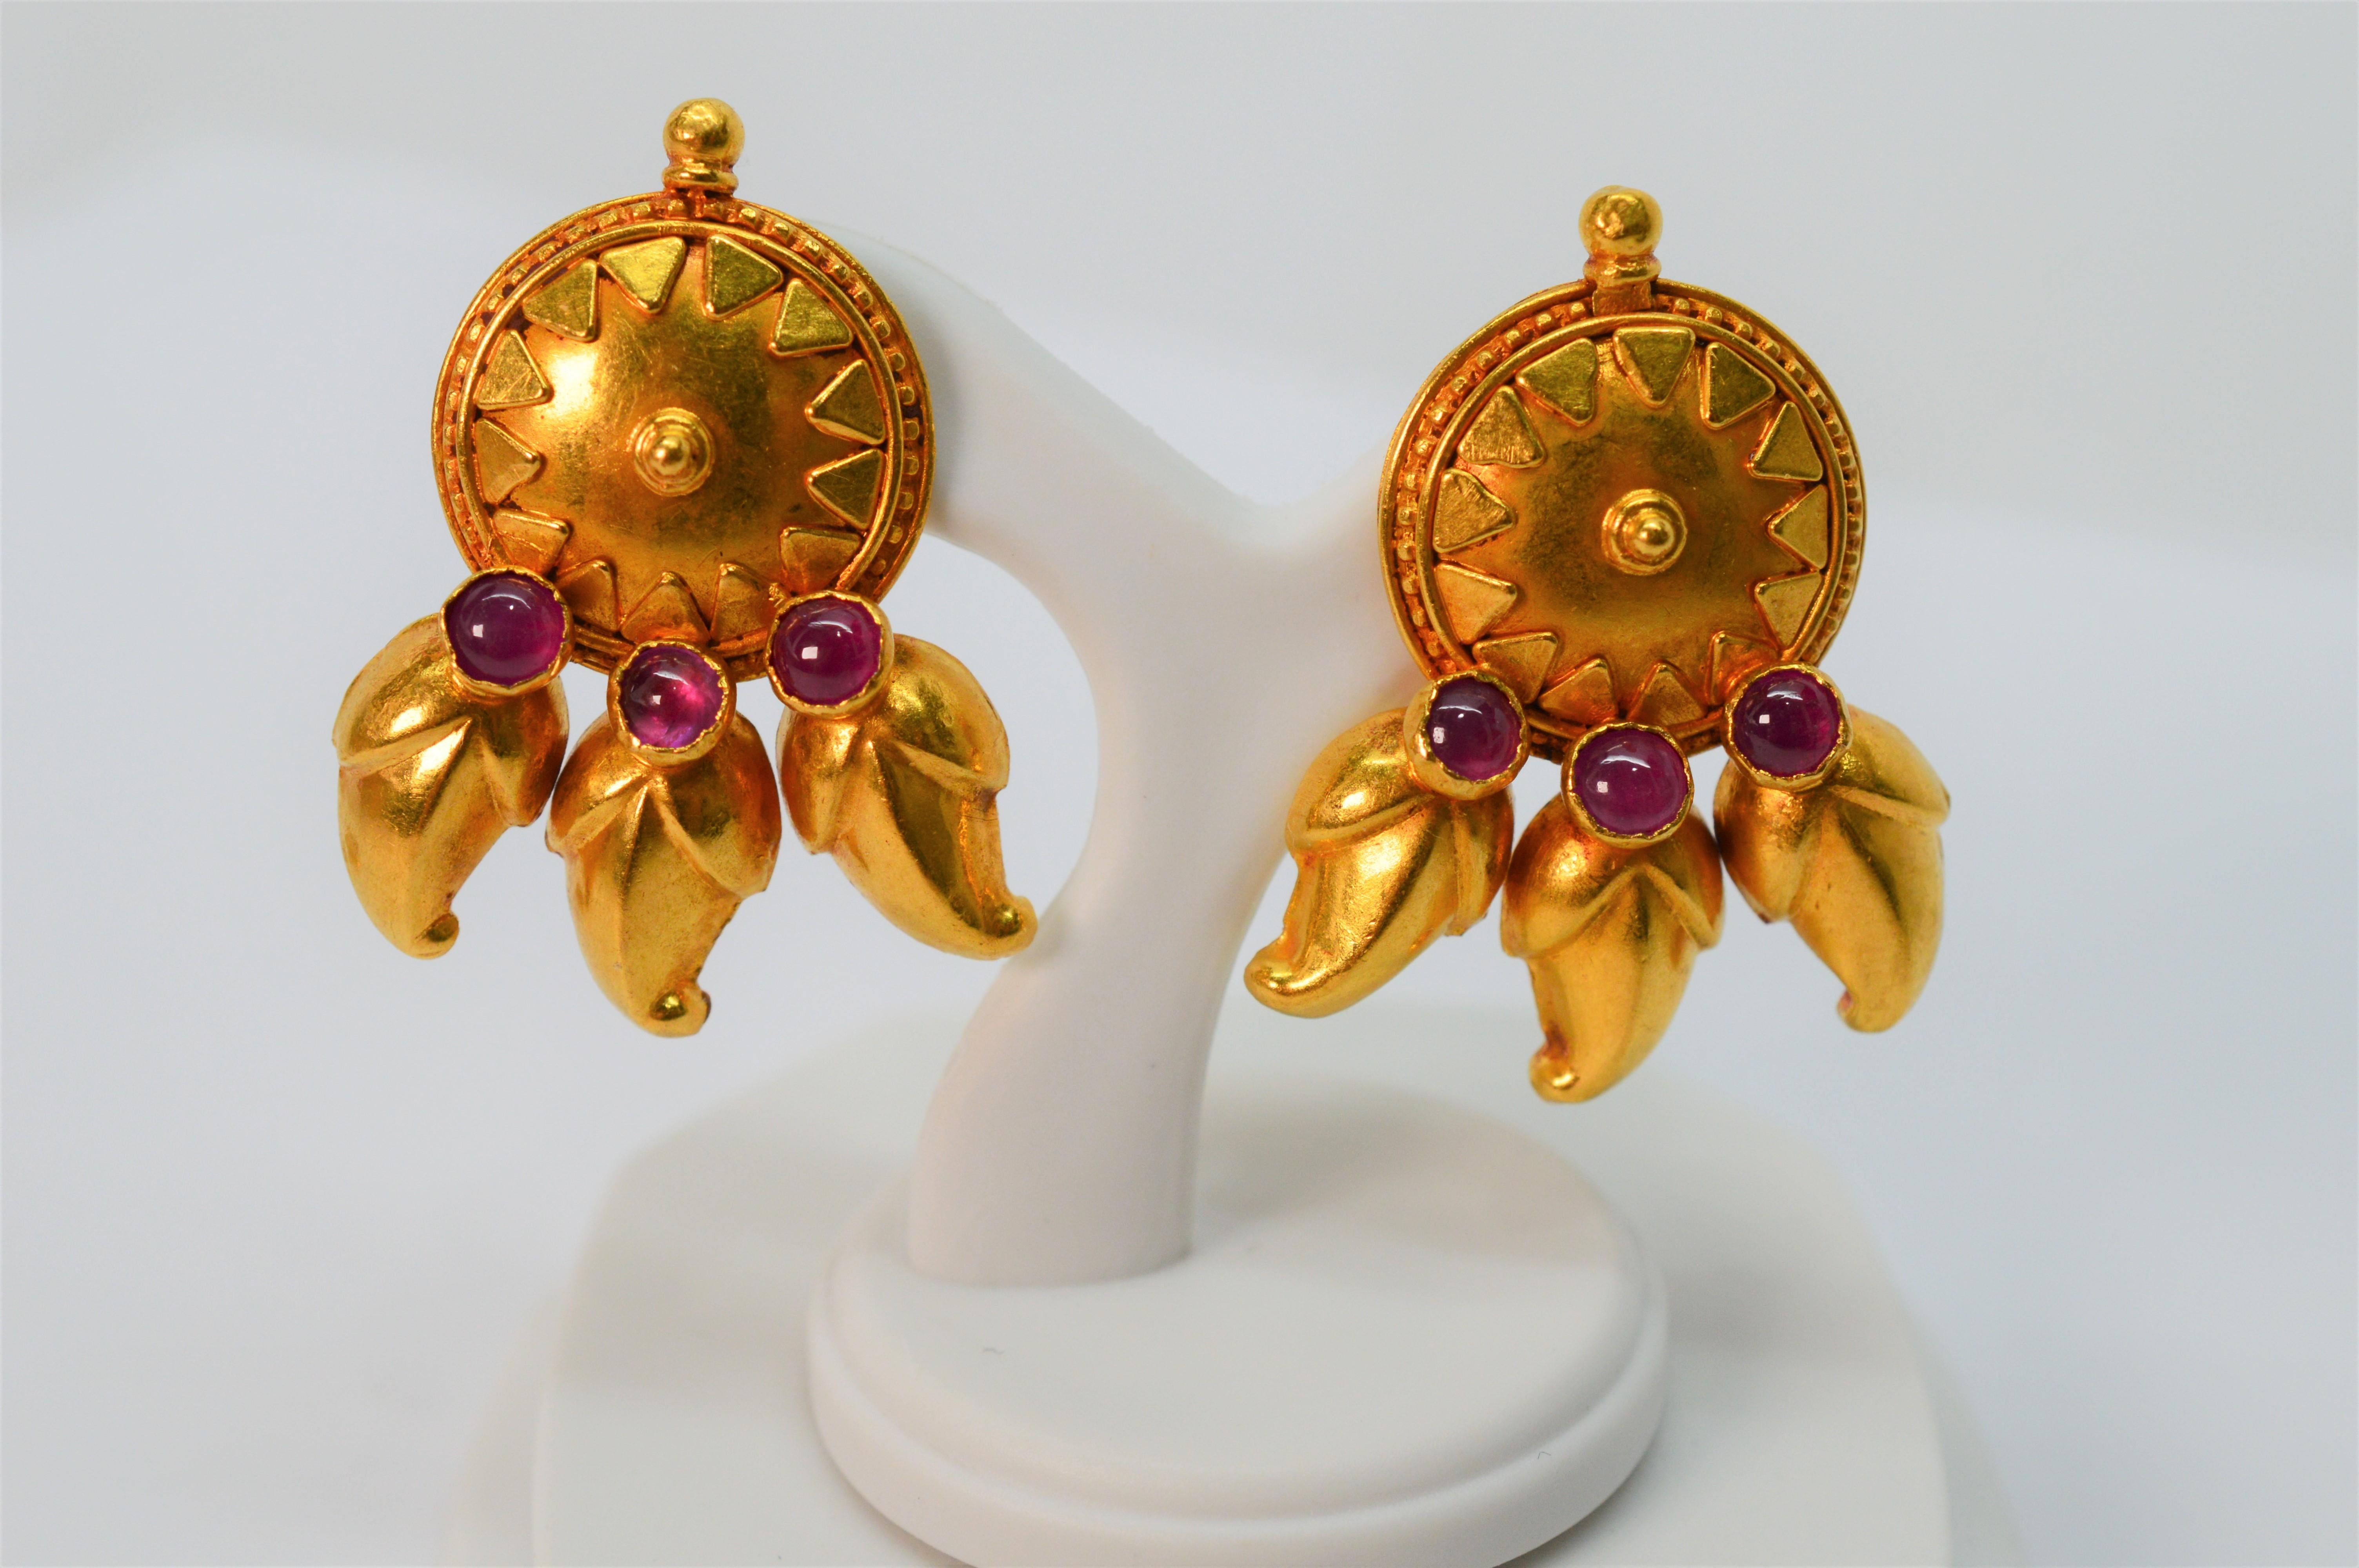 Satin 22 Karat Yellow Gold Medallion Stud Earrings w Ruby Cabochon Accents For Sale 1